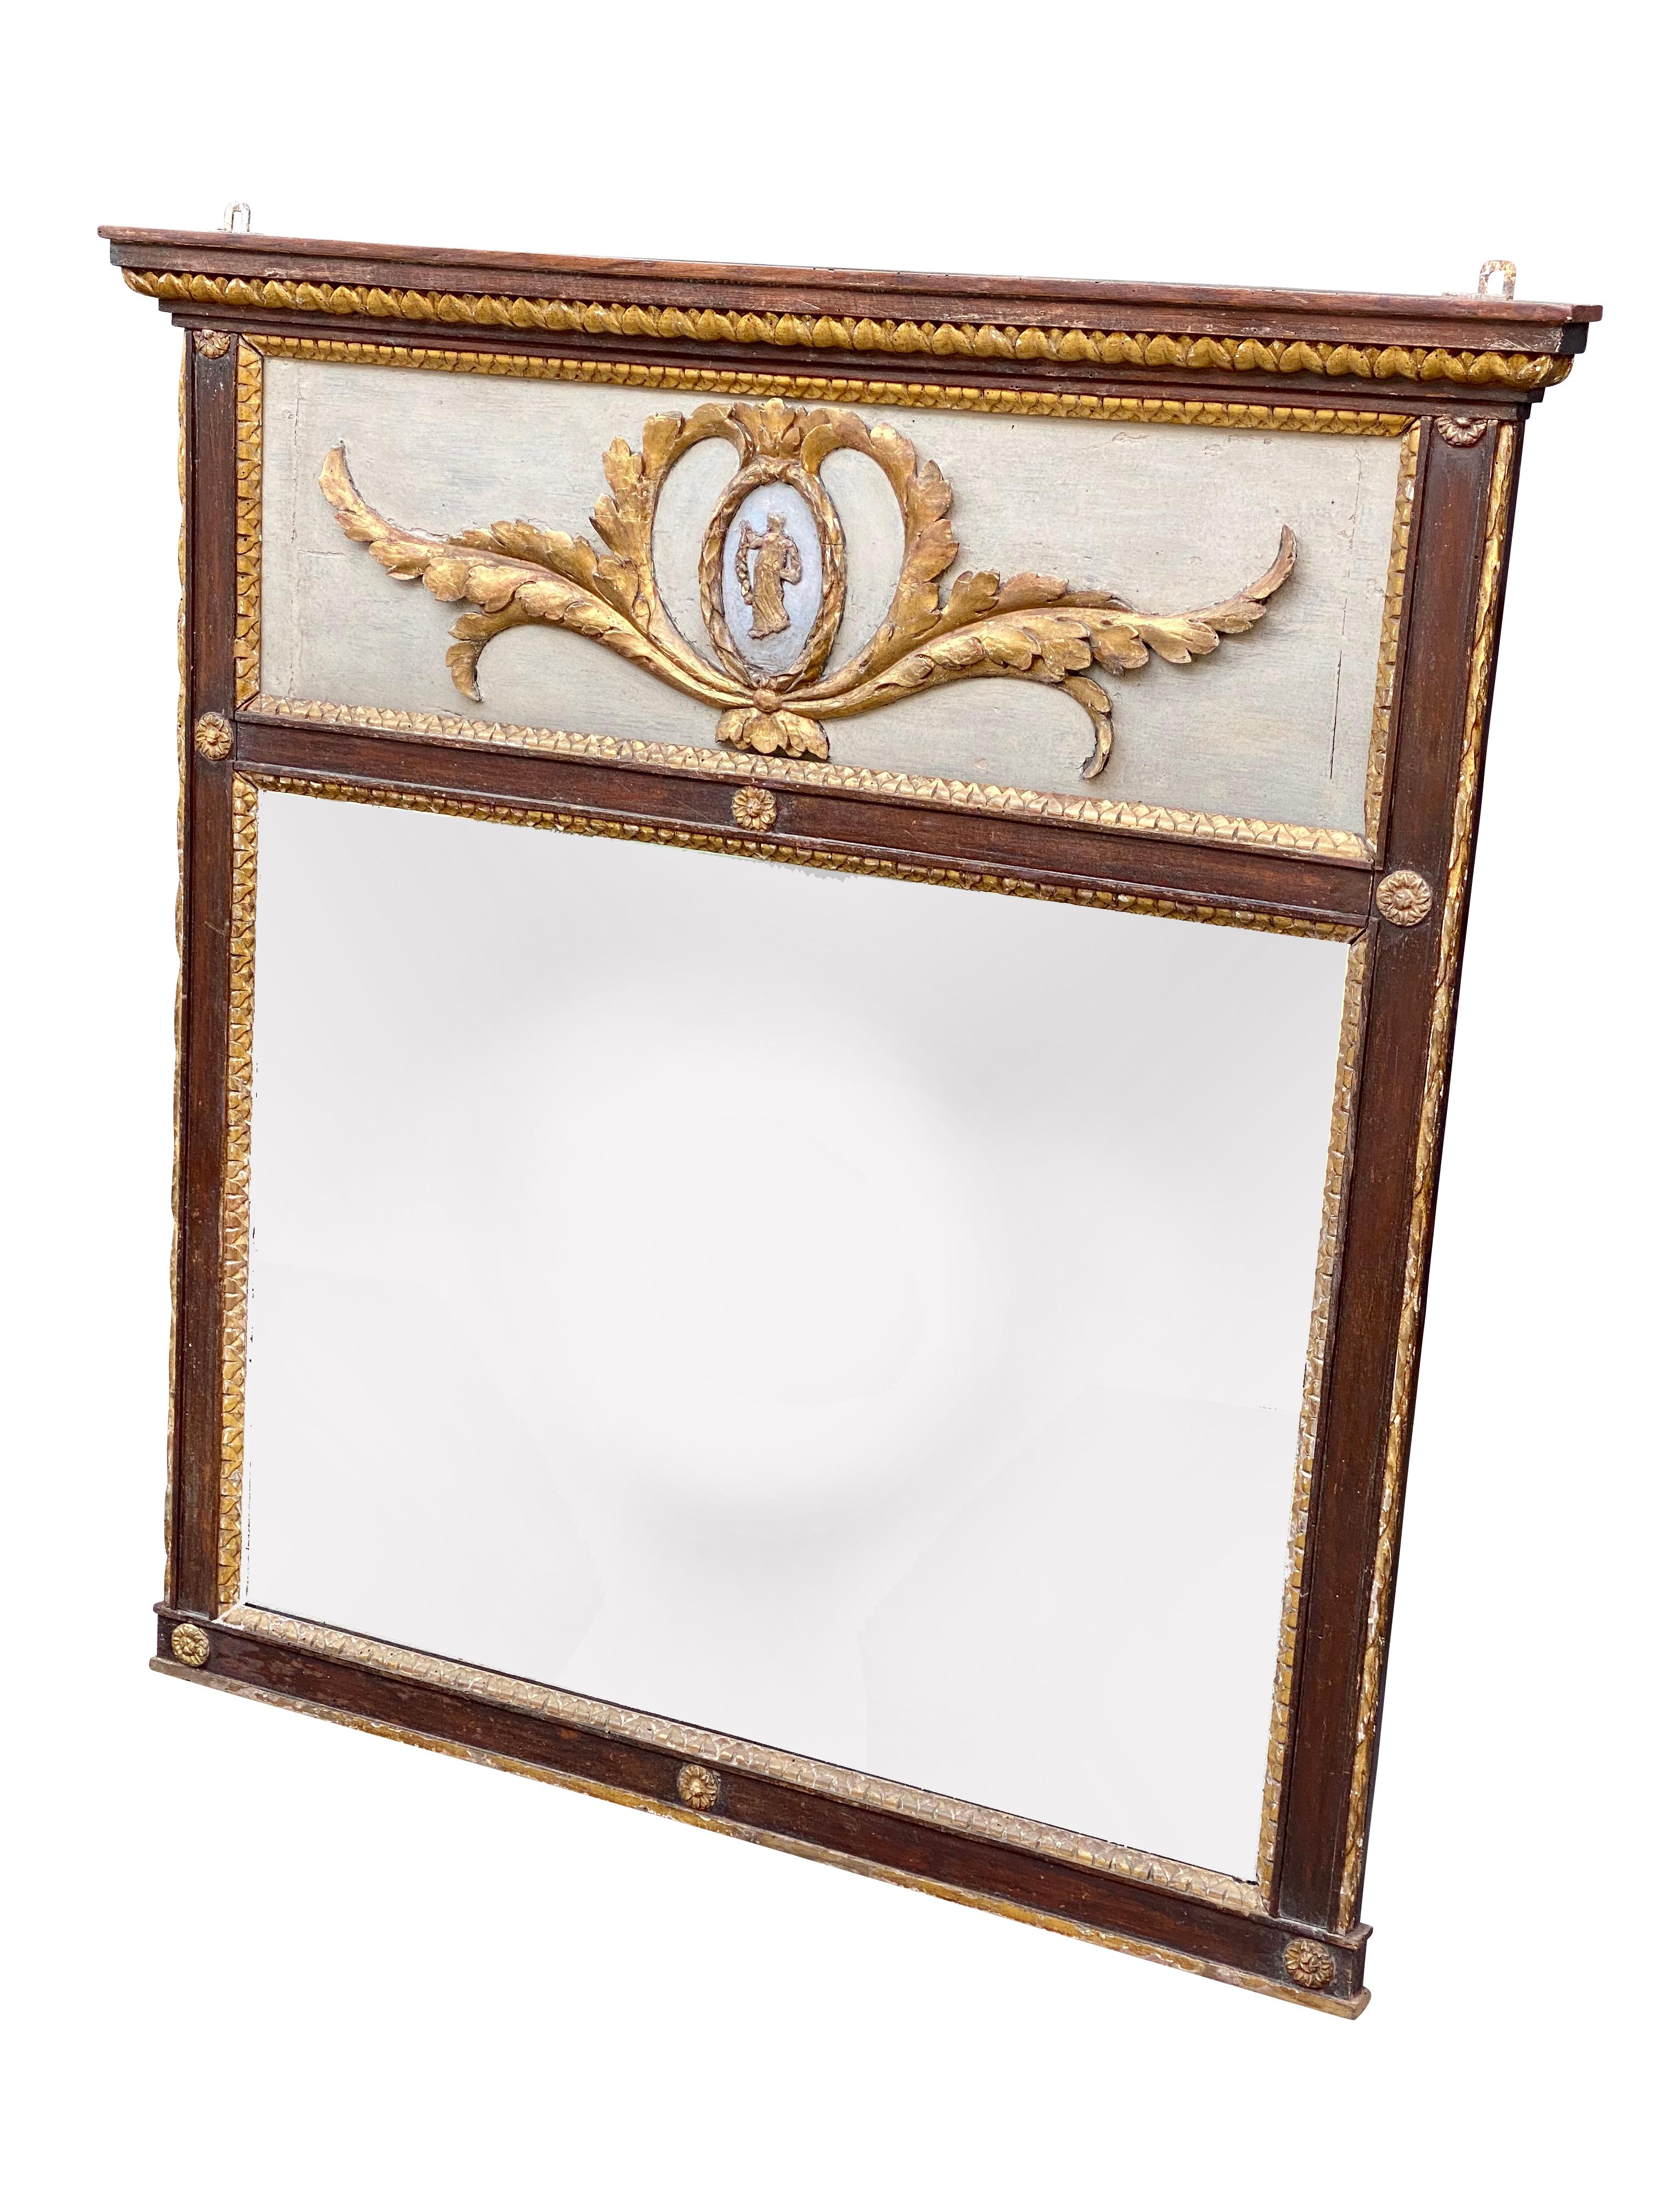 Rectangular with leaf tip carved cornice over a panel with central portrait medallion surrounded by trailing leaves over a mirror plate. Painted frame with rosettes and gilt details.